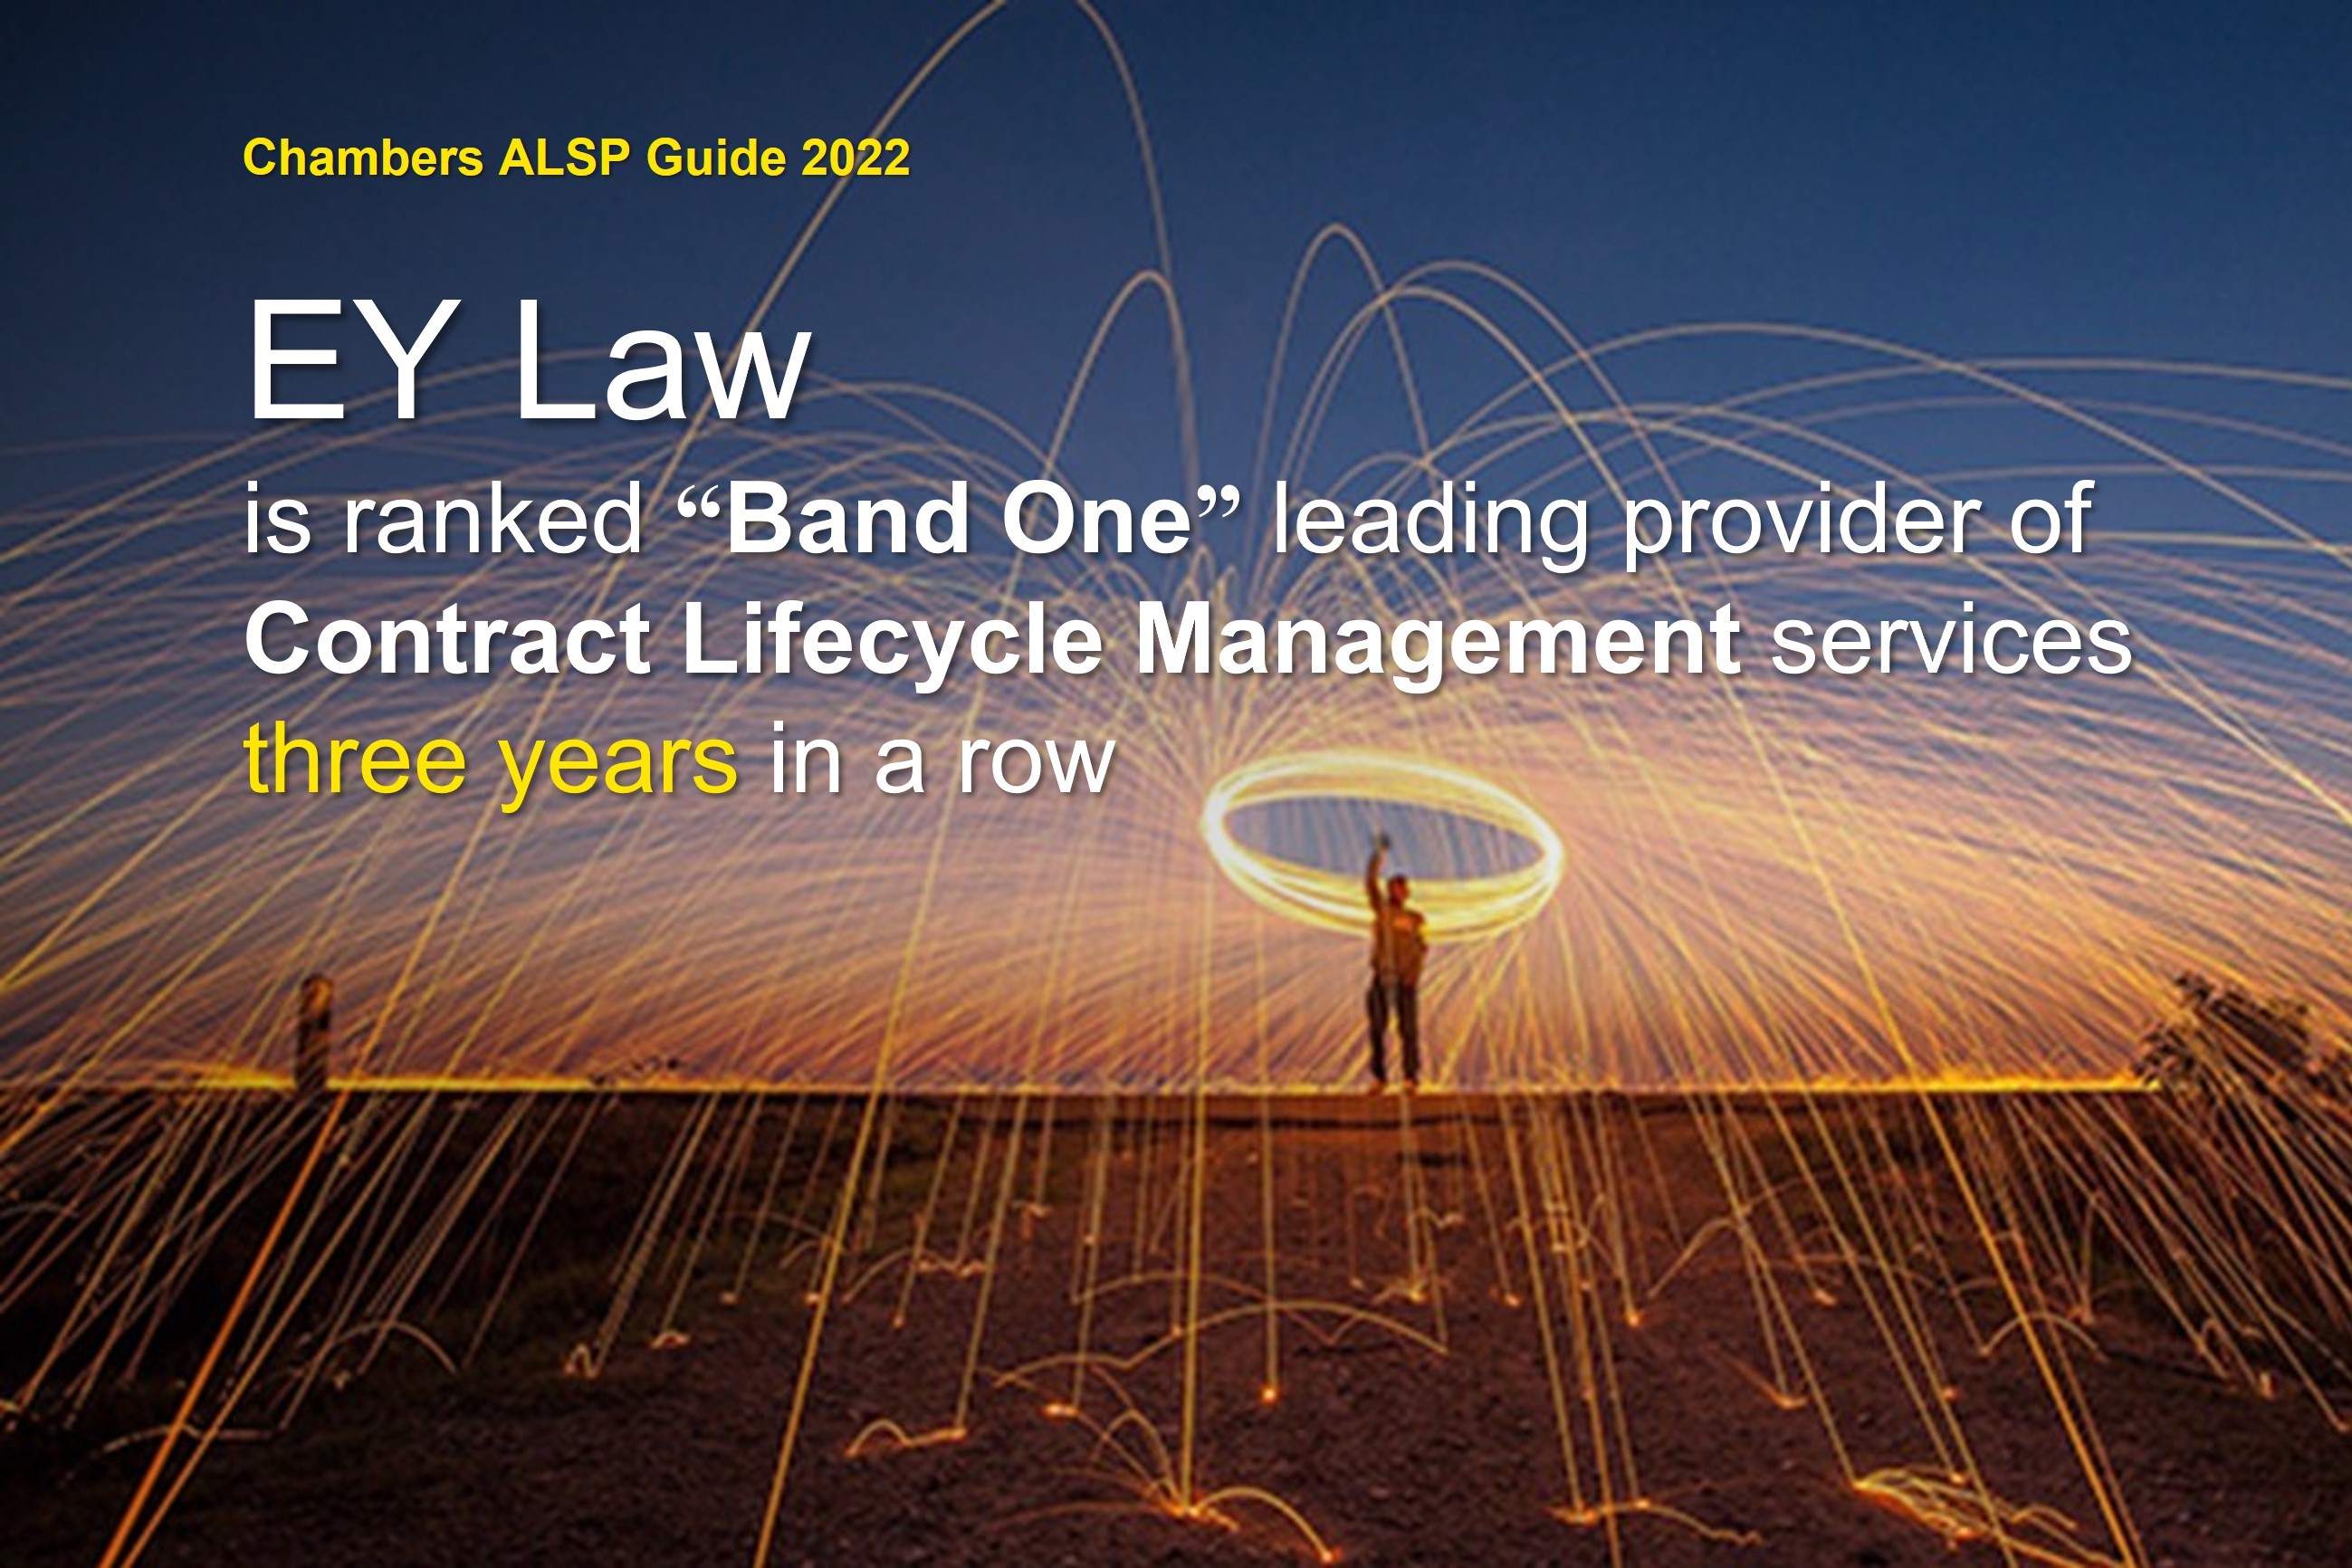 EY Law ranked as a "Band One" leading provider of CLM services three year in a row by Chambers